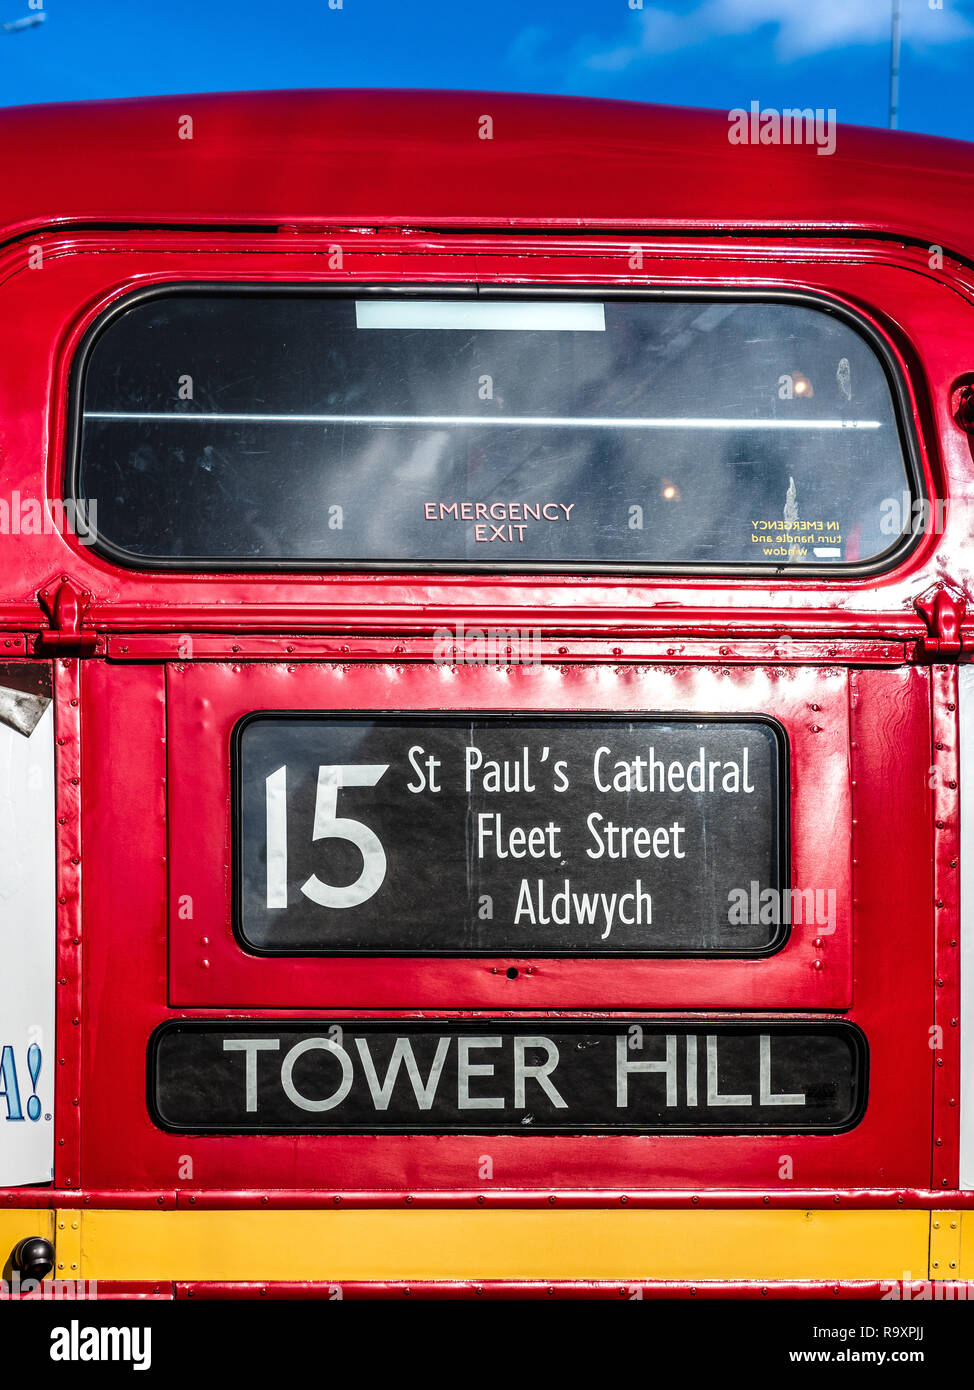 Number 15 Bus - London Tourism - Classic London Routemaster still used on a heritage route 15 in central London between Trafalgar Square & Tower Hill Stock Photo